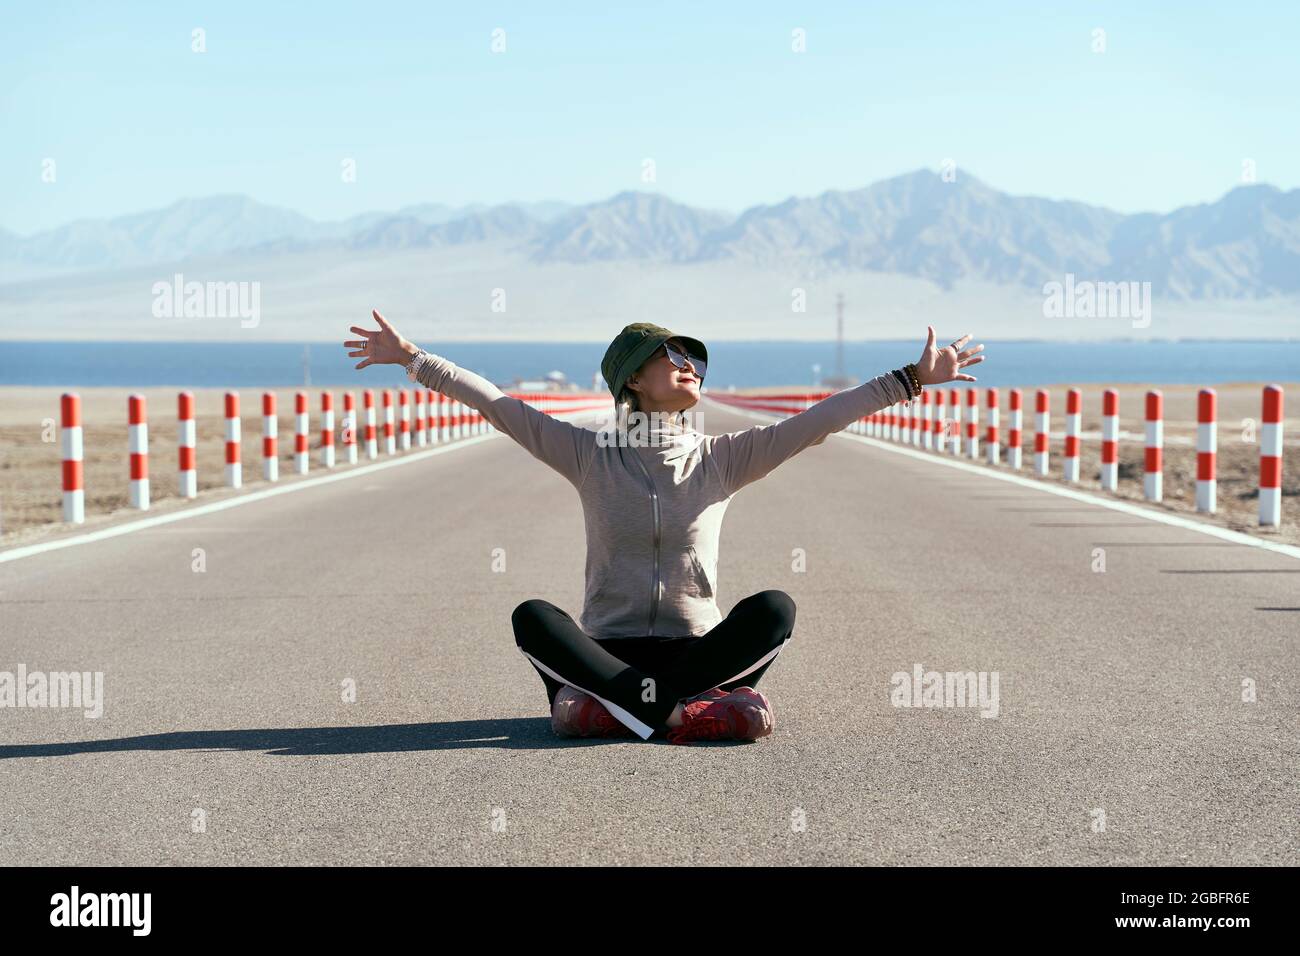 asian woman tourist sitting in the middle of an empty open road with lake and rolling mountains in background, leg crossed arms outstretched. Stock Photo